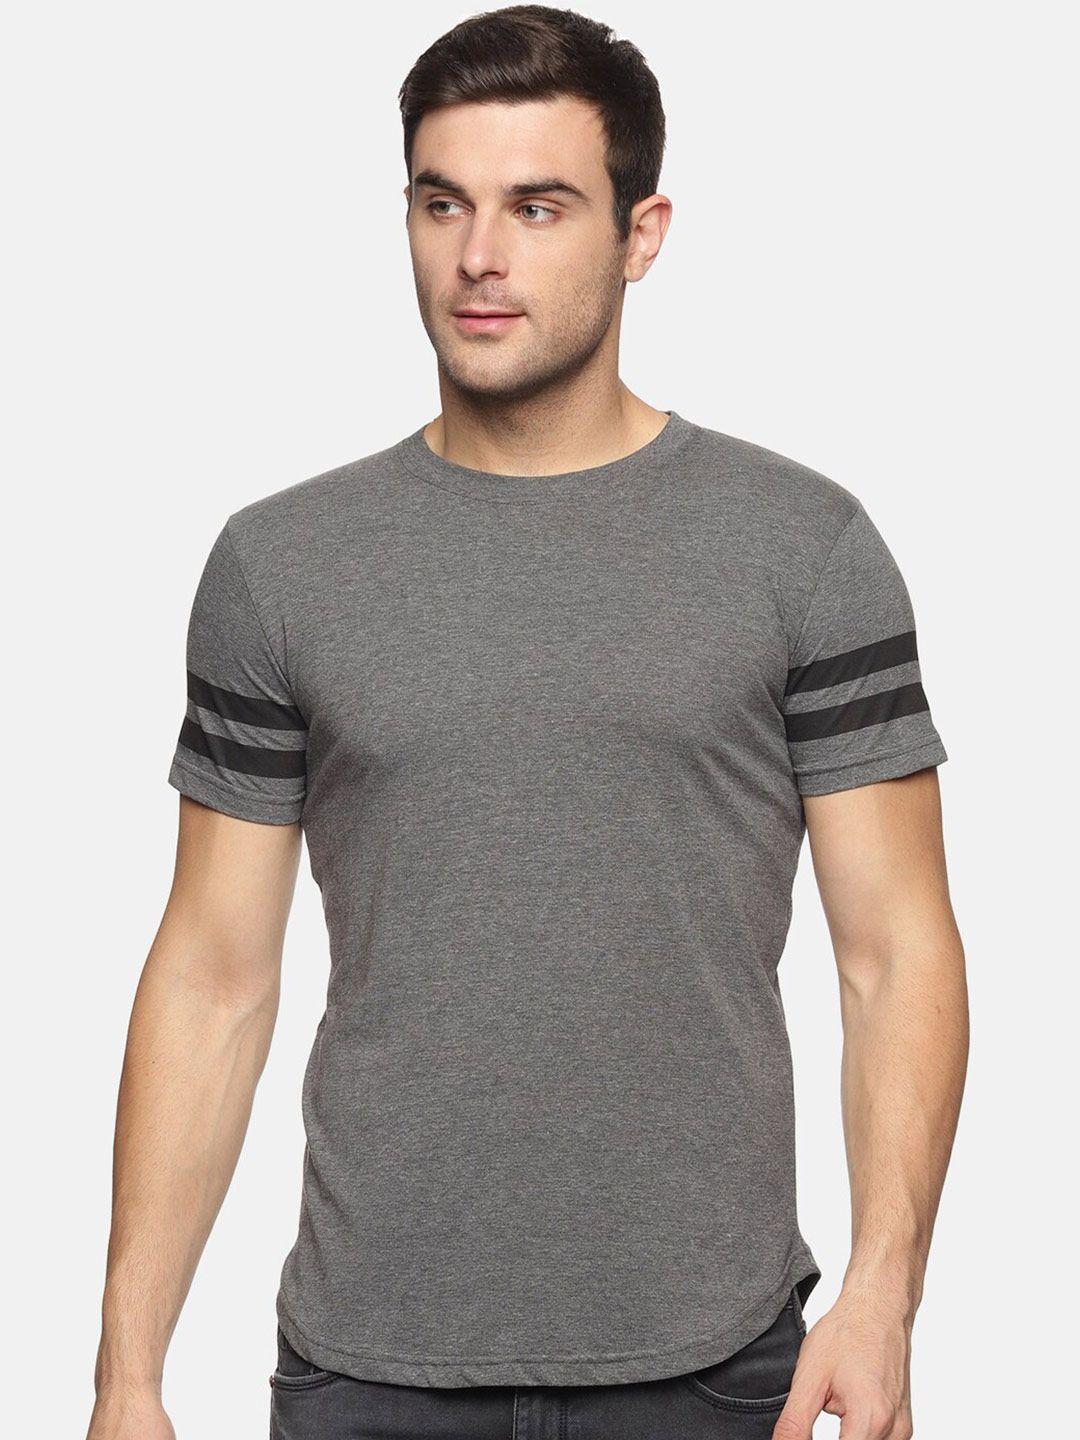 trends tower men charcoal solid half sleeves t-shirt